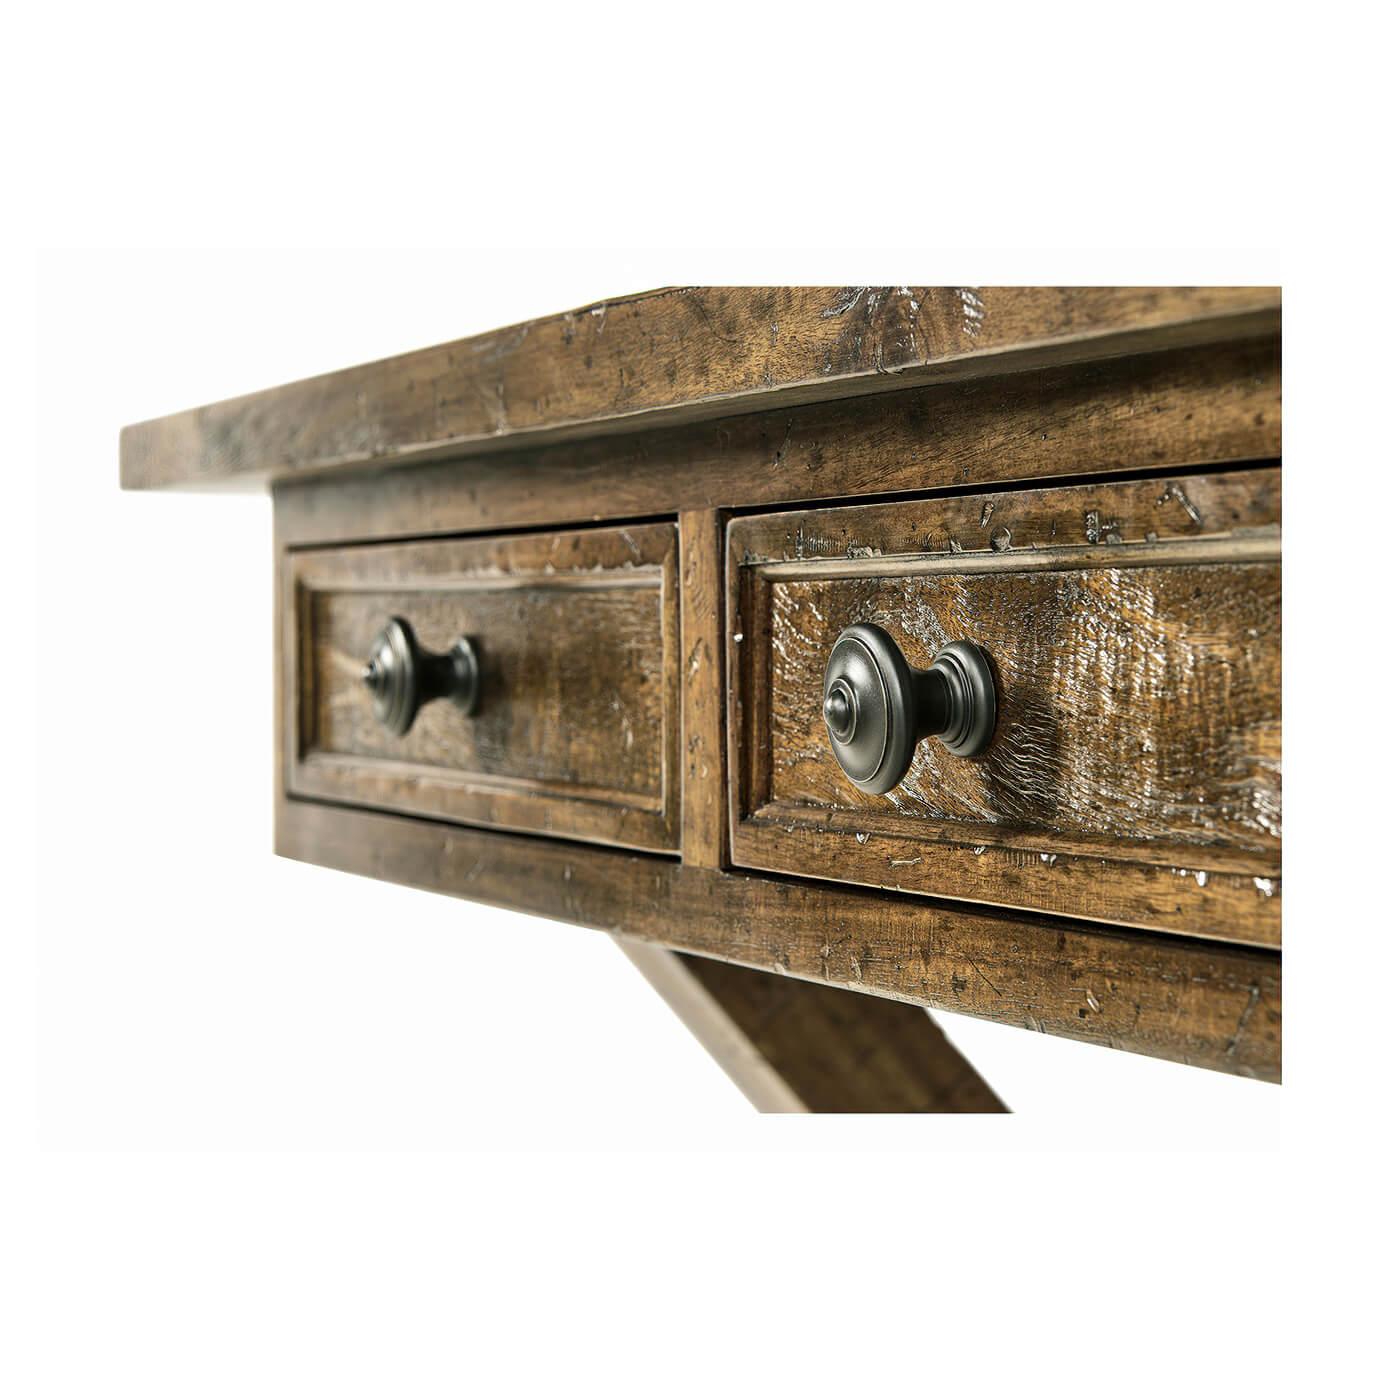 Vietnamese Rustic Country Walnut Desk, Light Driftwood Finish For Sale